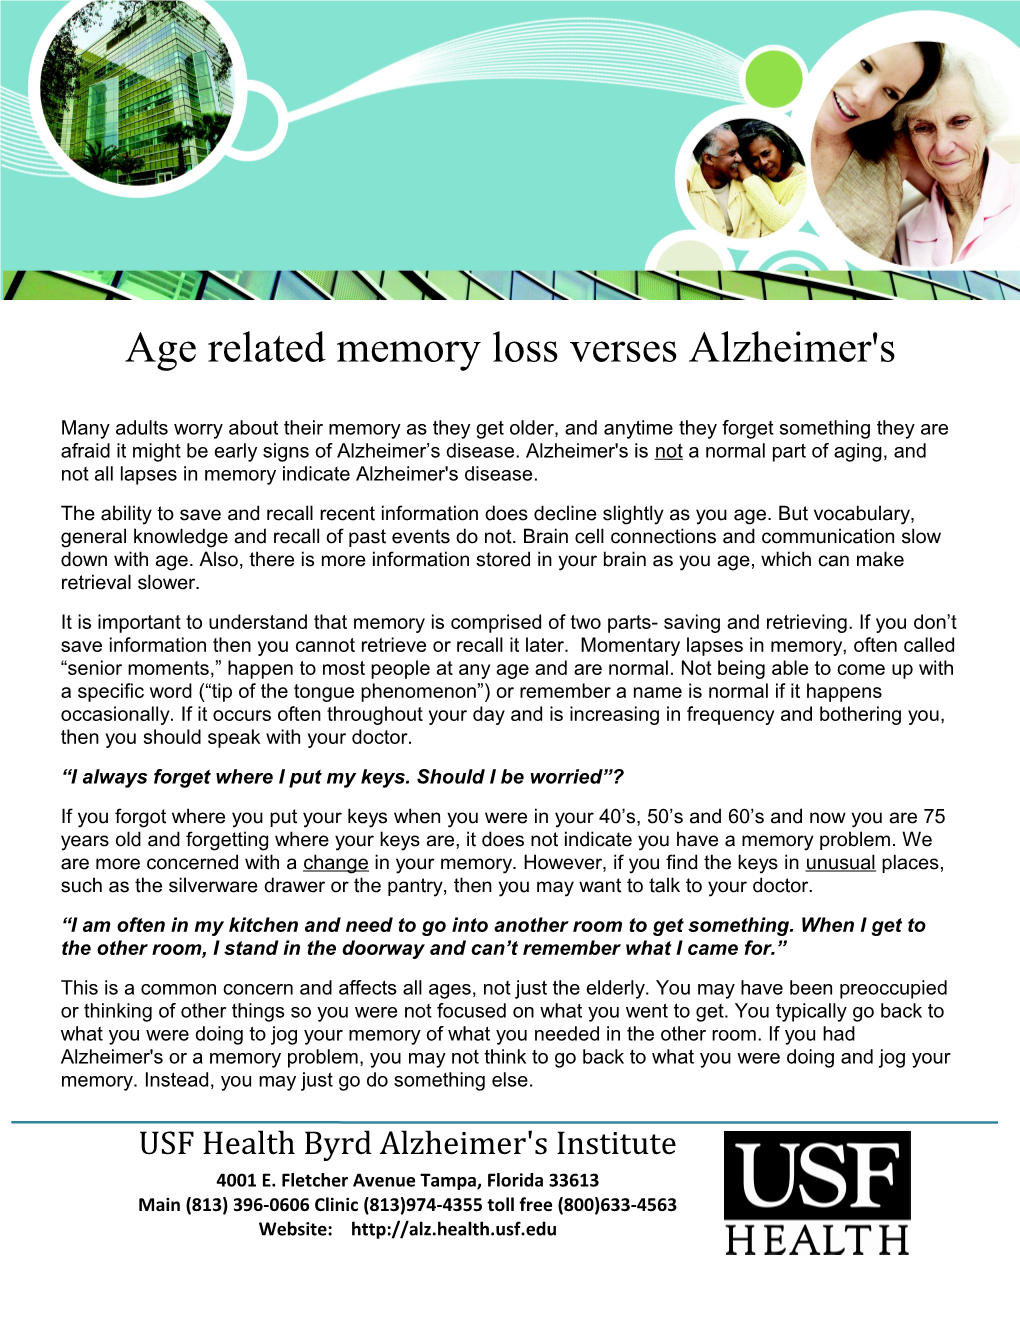 Age Related Memory Loss Verses Alzheimer's